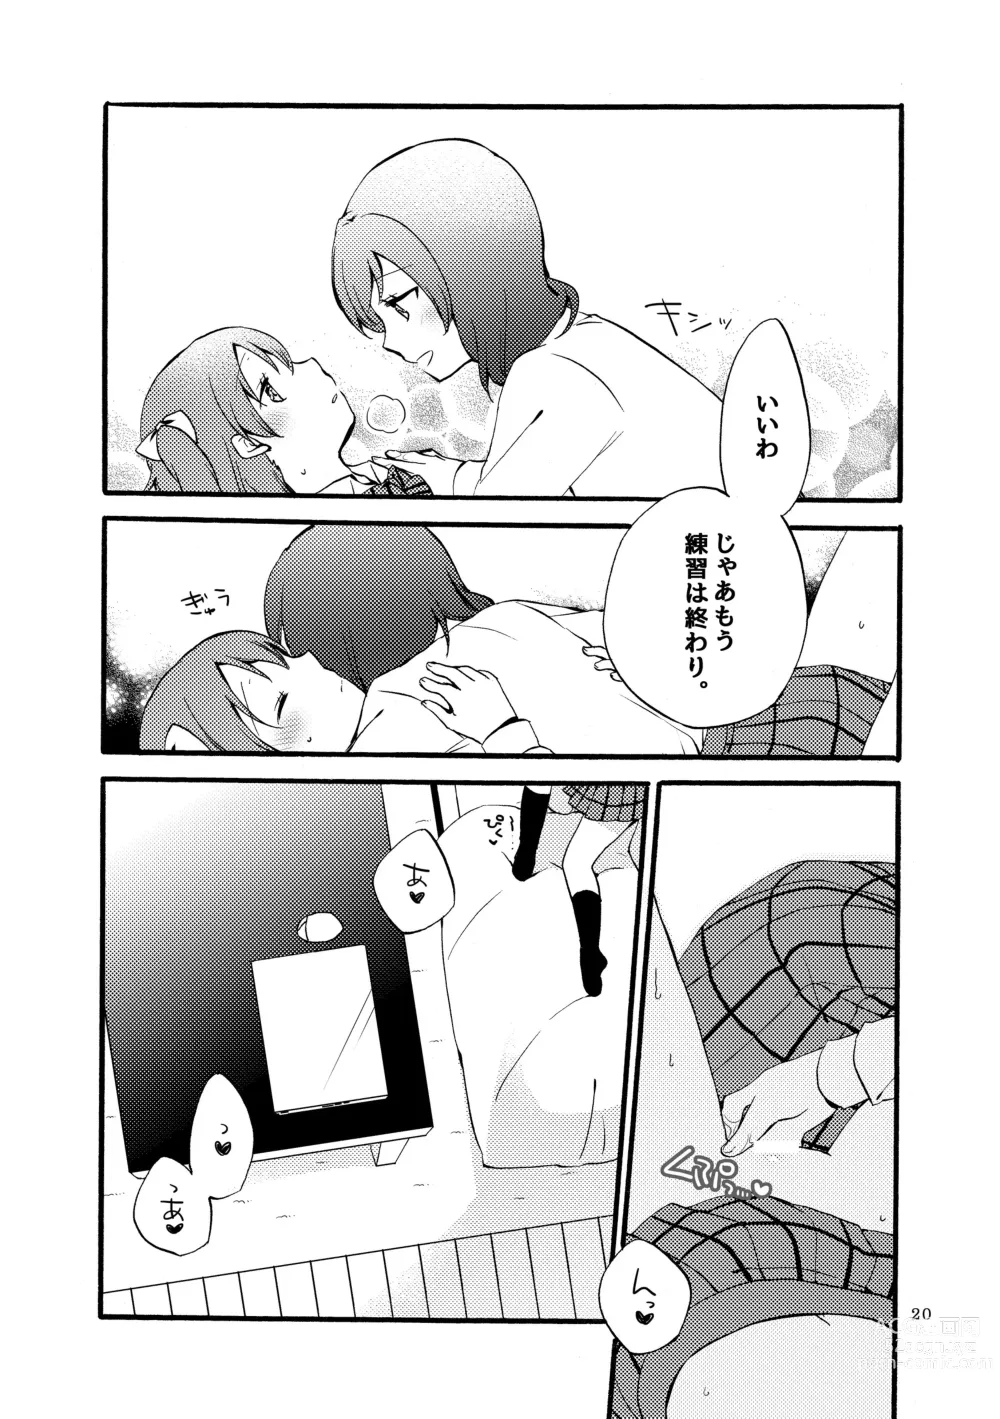 Page 19 of doujinshi Nishikino-shiki Hassei Renshuu - What are the contents of this vocal exercises?